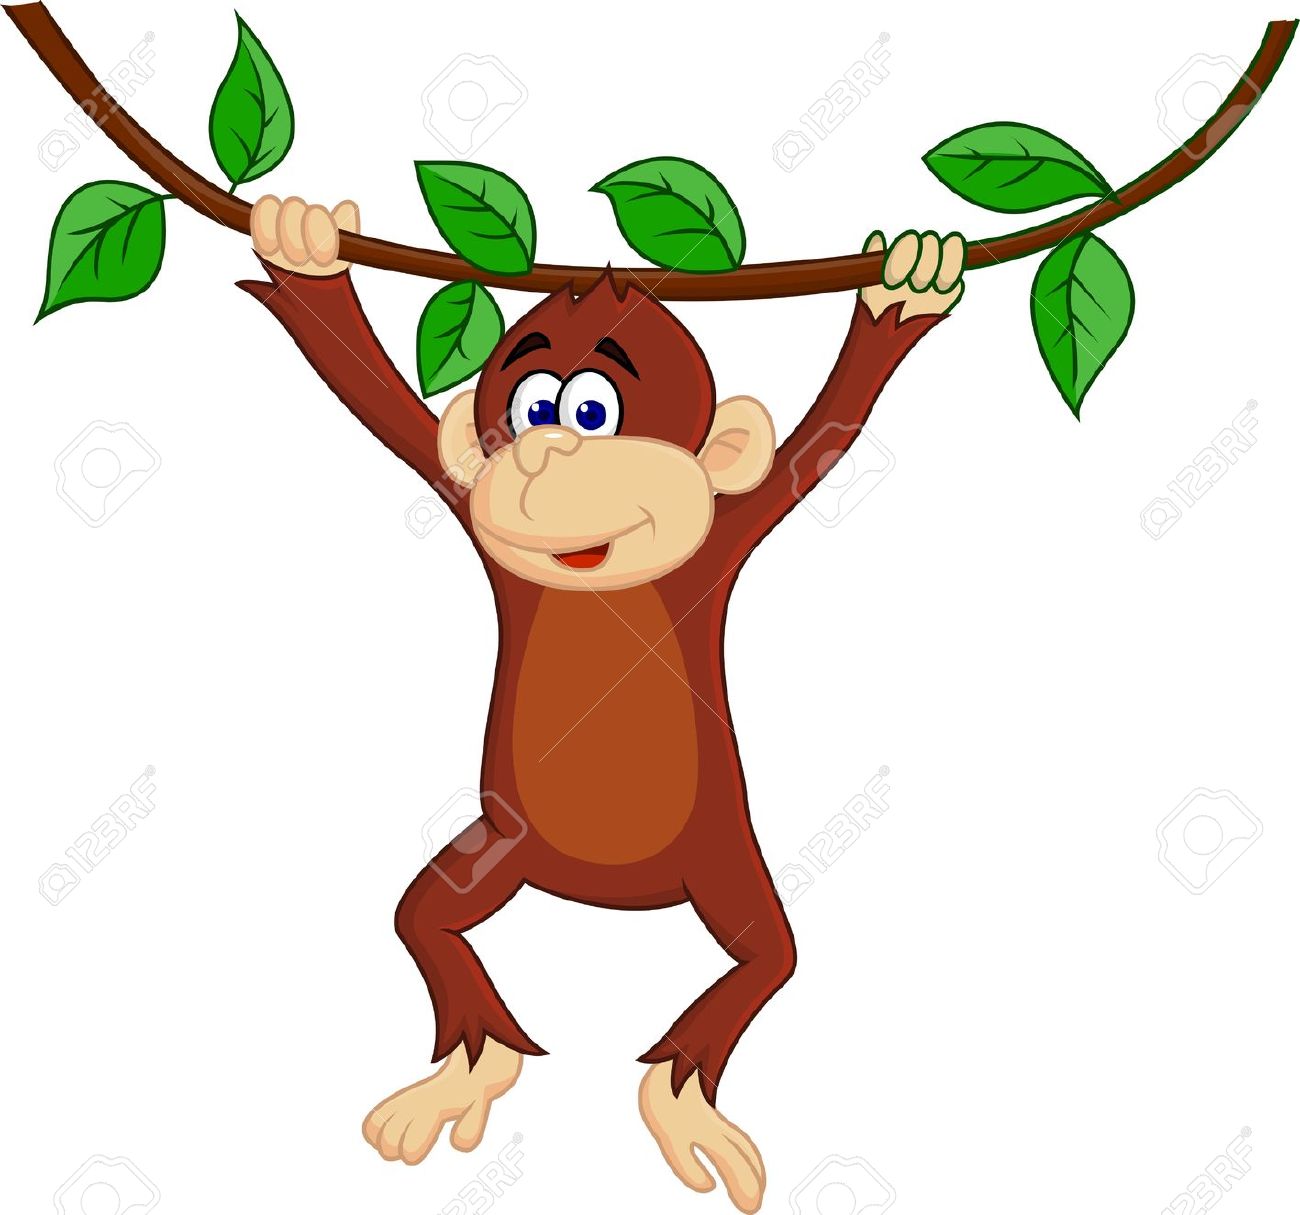 Baby monkeys stock vector illustration and royalty free baby